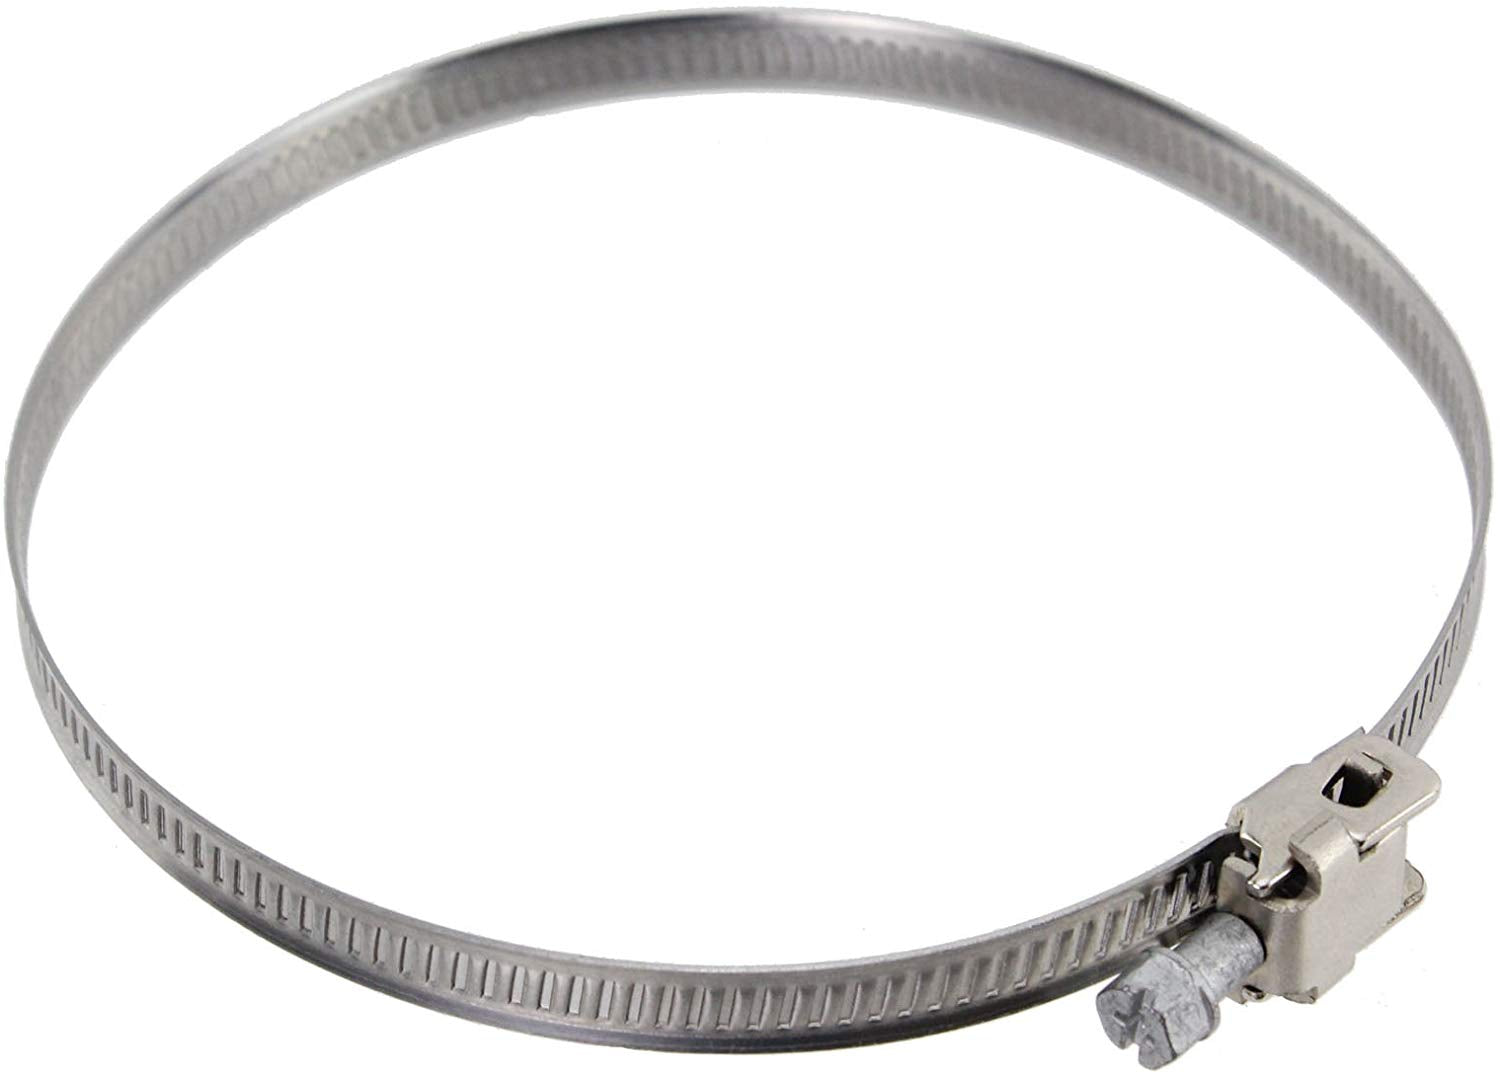 Condenser Box & Extra Long Hose Kit With Connection Ring for Samsung Tumble Dryer (4" / 100mm Diameter / 6M Hose)